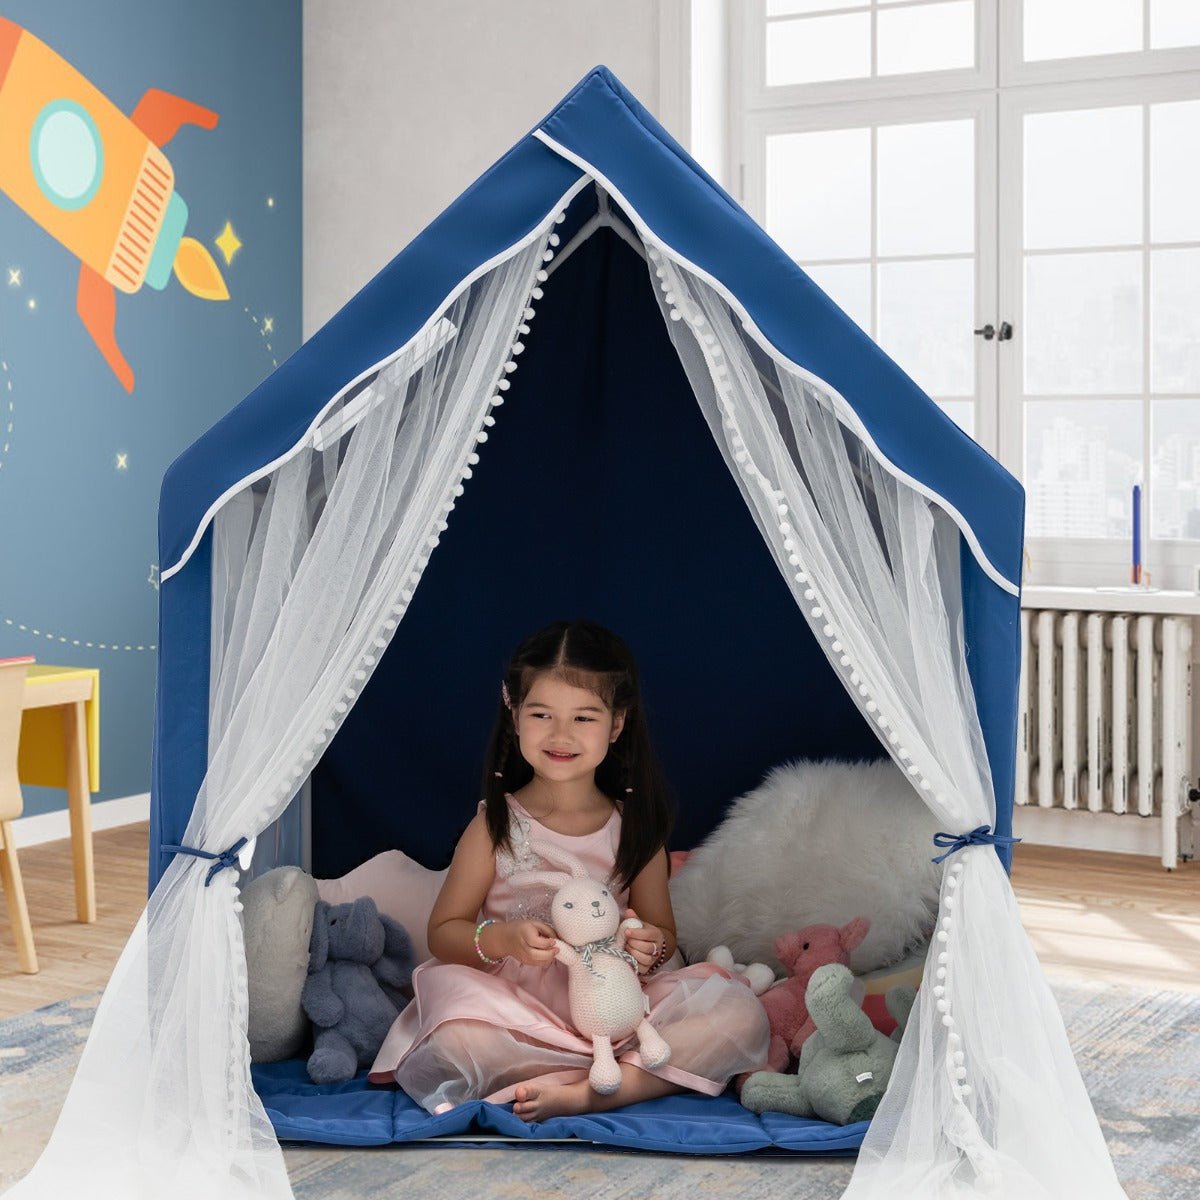 Adventure Awaits in the Large Kids Play Tent with Gauze Door